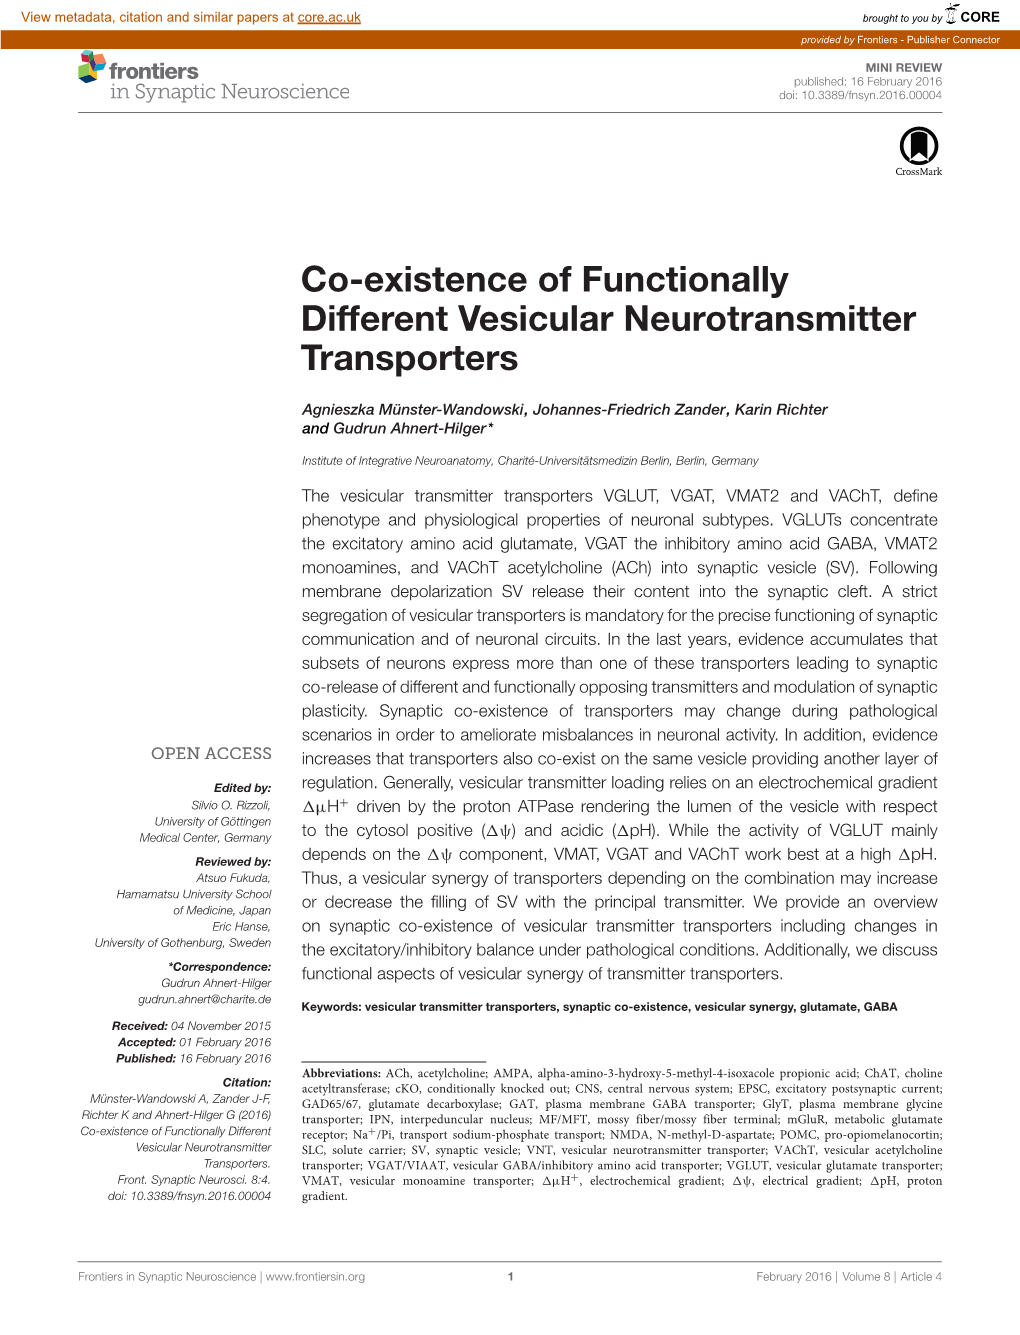 Co-Existence of Functionally Different Vesicular Neurotransmitter Transporters